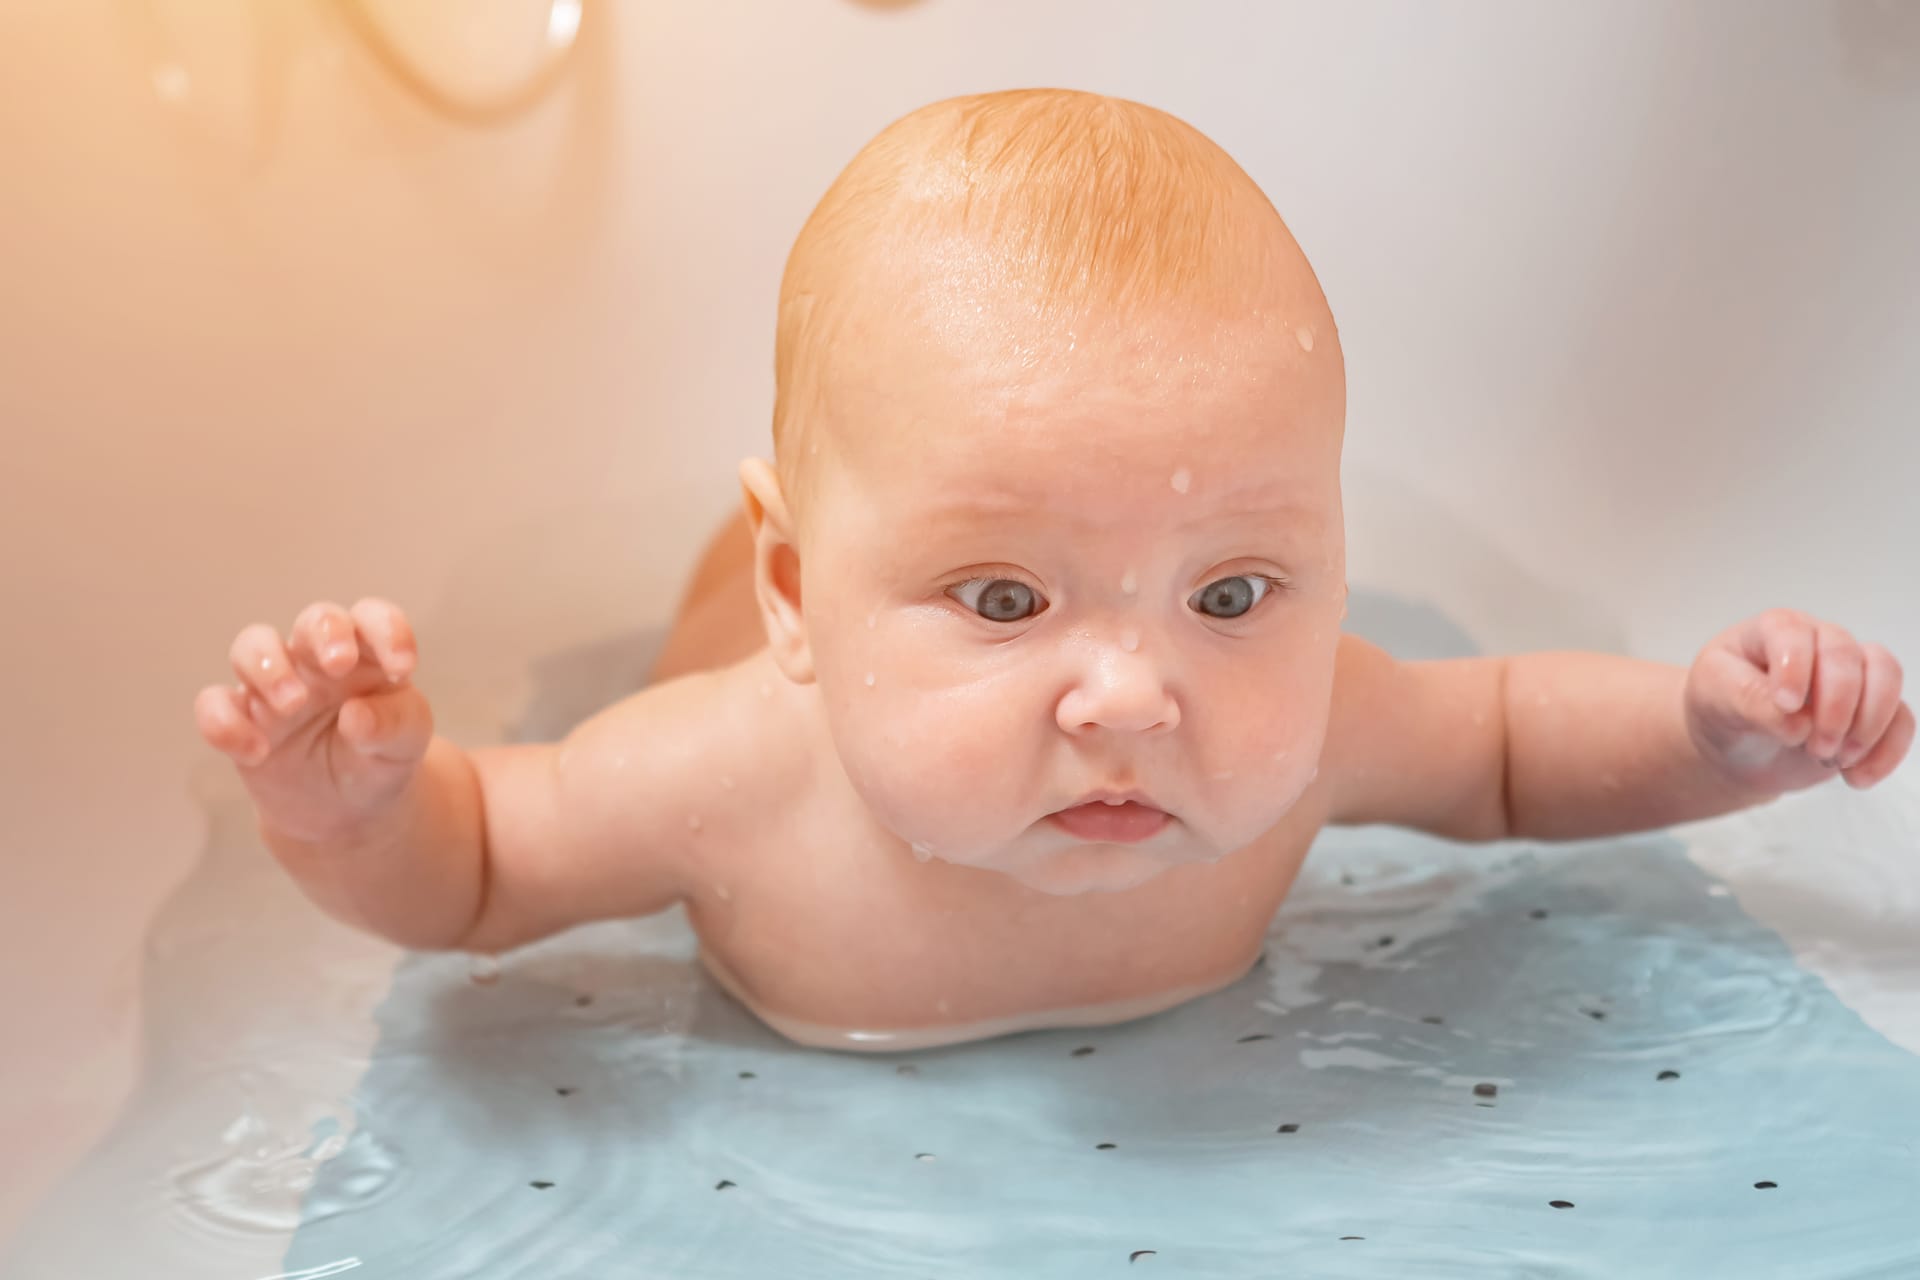 Girl lies bathtub with water child looks camera with wonderment